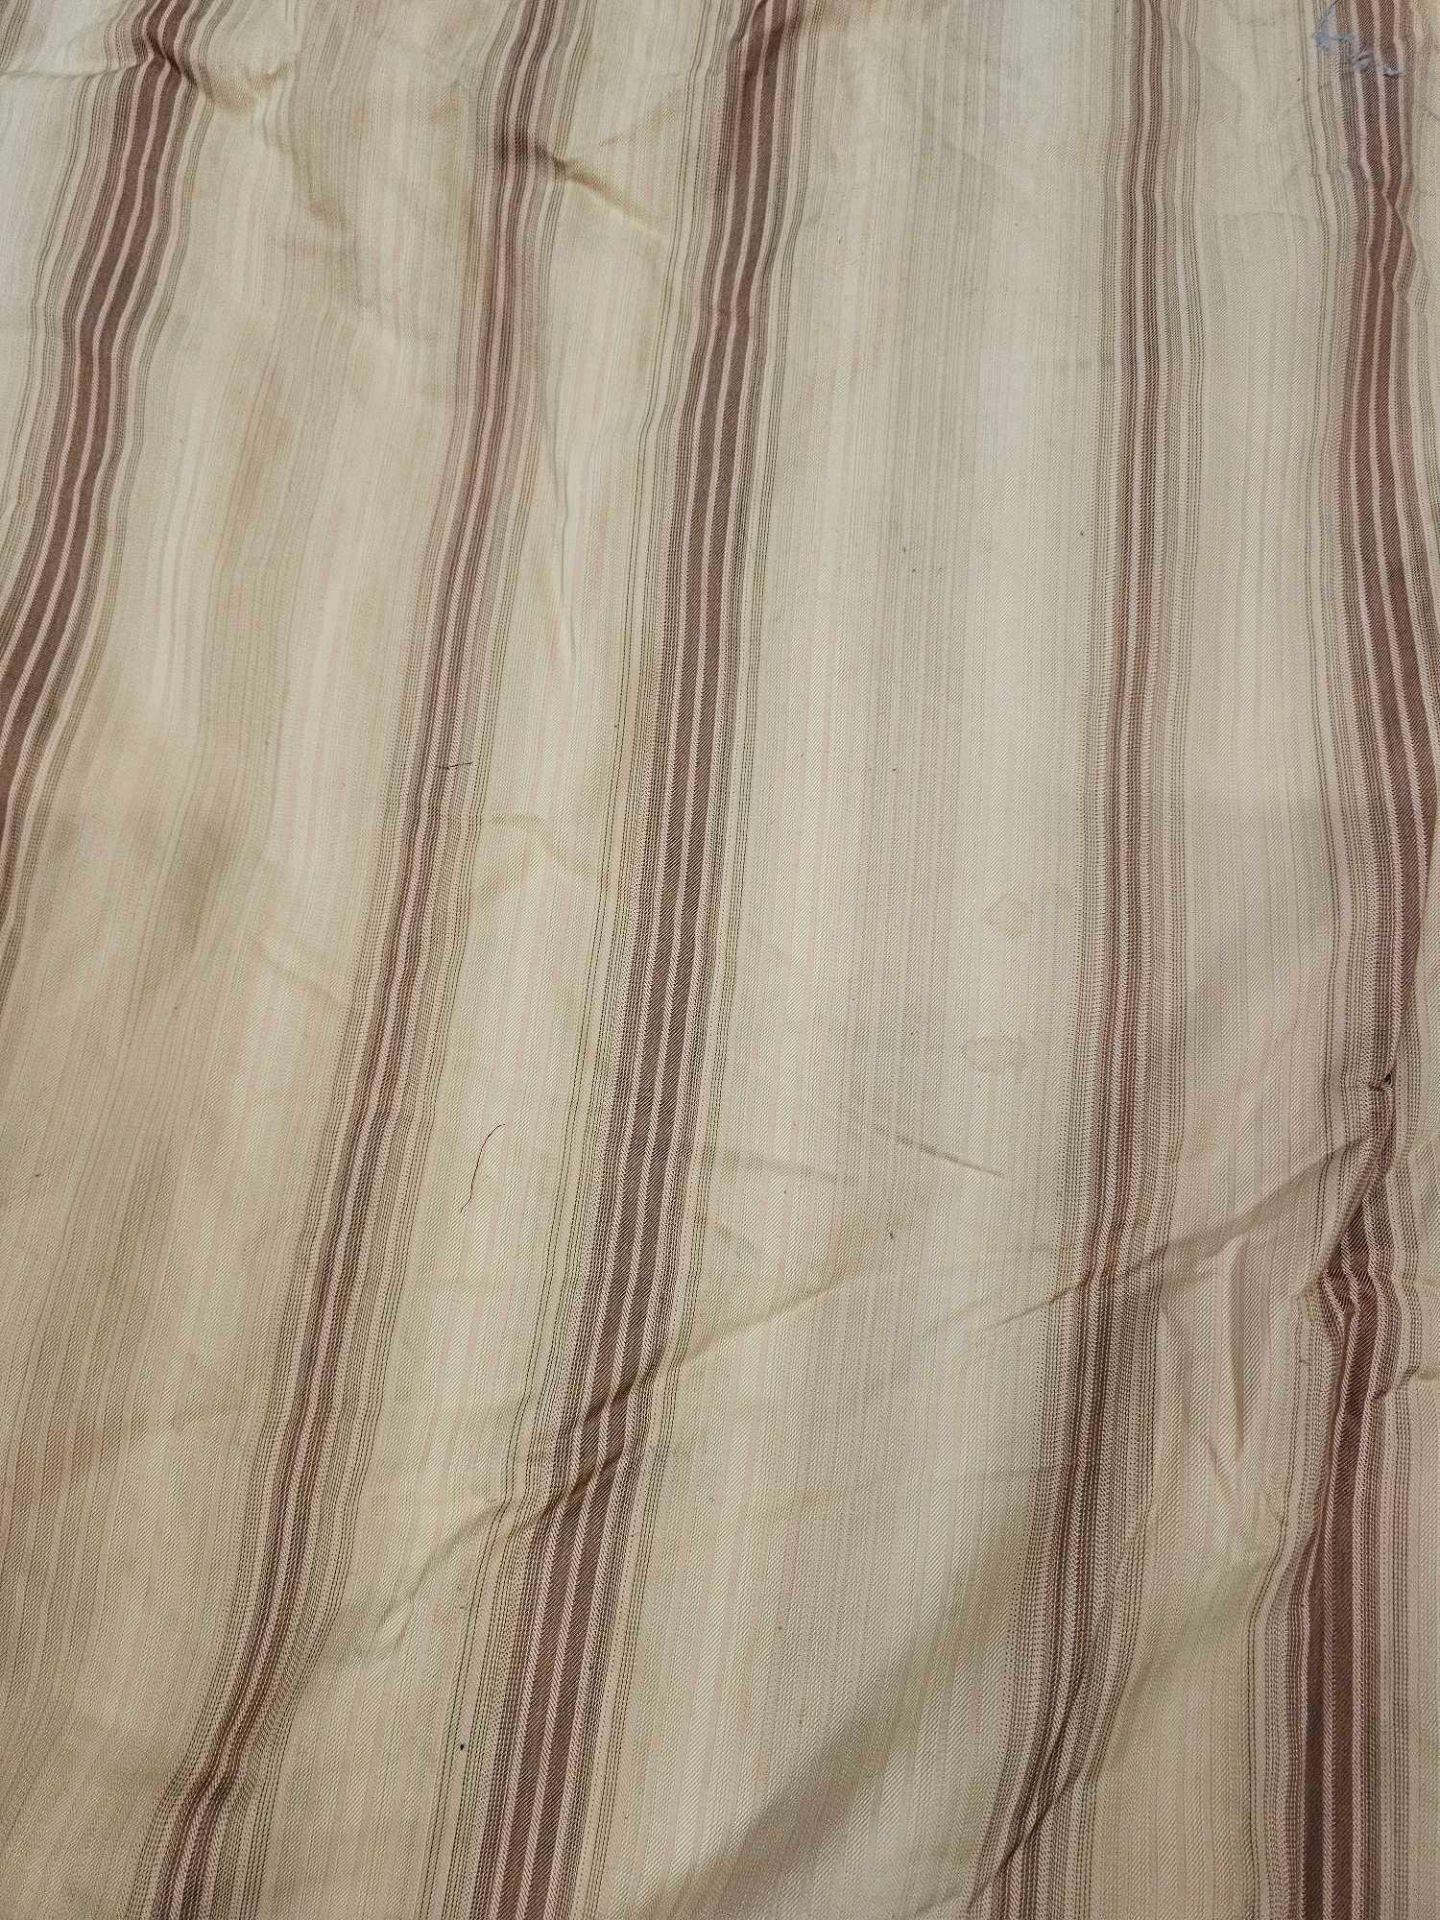 Pair Of Silk Drapes Striped Gold / Brown Size -cm 132 x 288 Ref Dorch 68 - Image 3 of 3